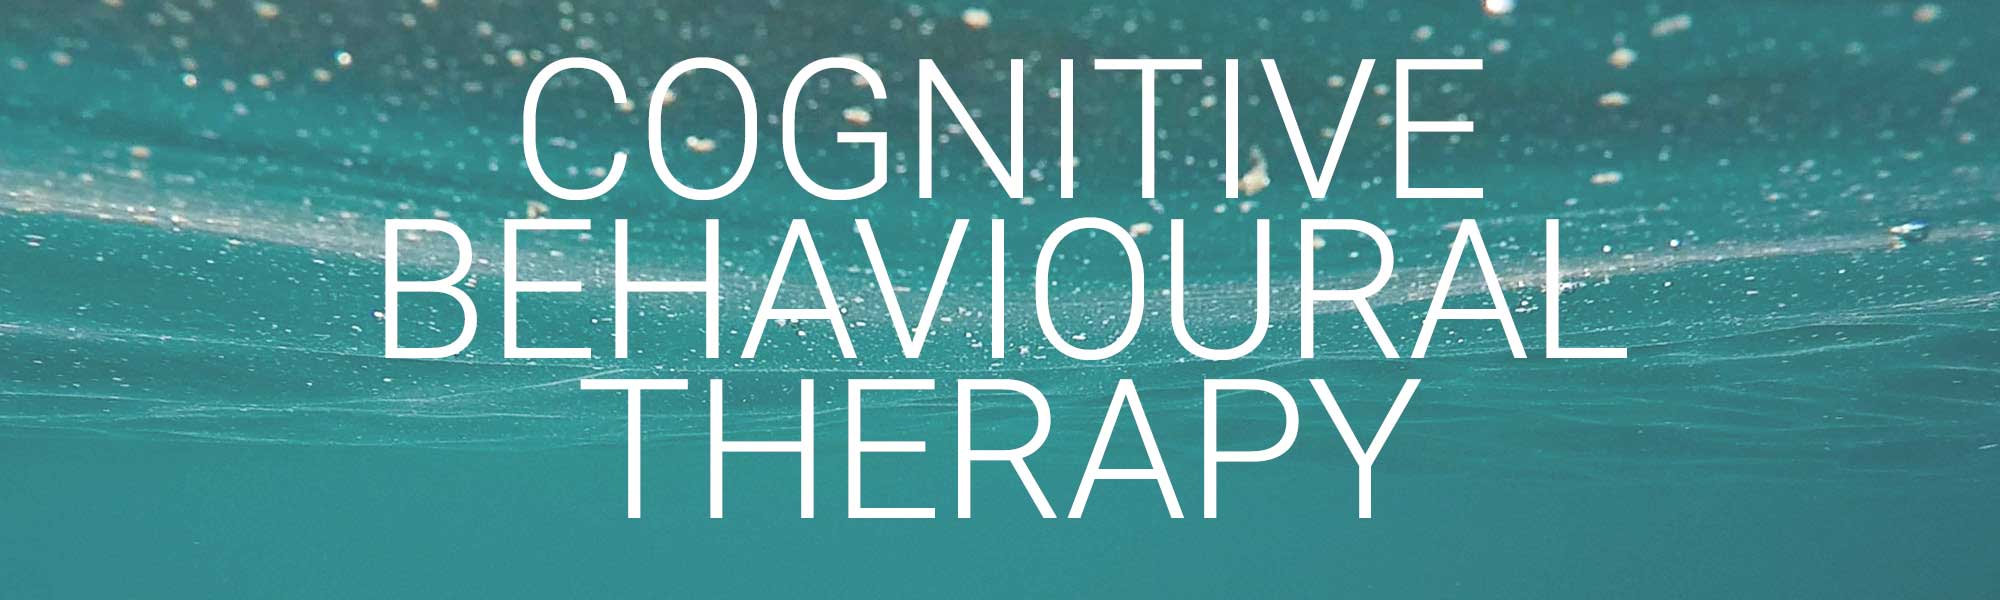 COGNITIVE BEHAVIORAL THERAPY (CBT)